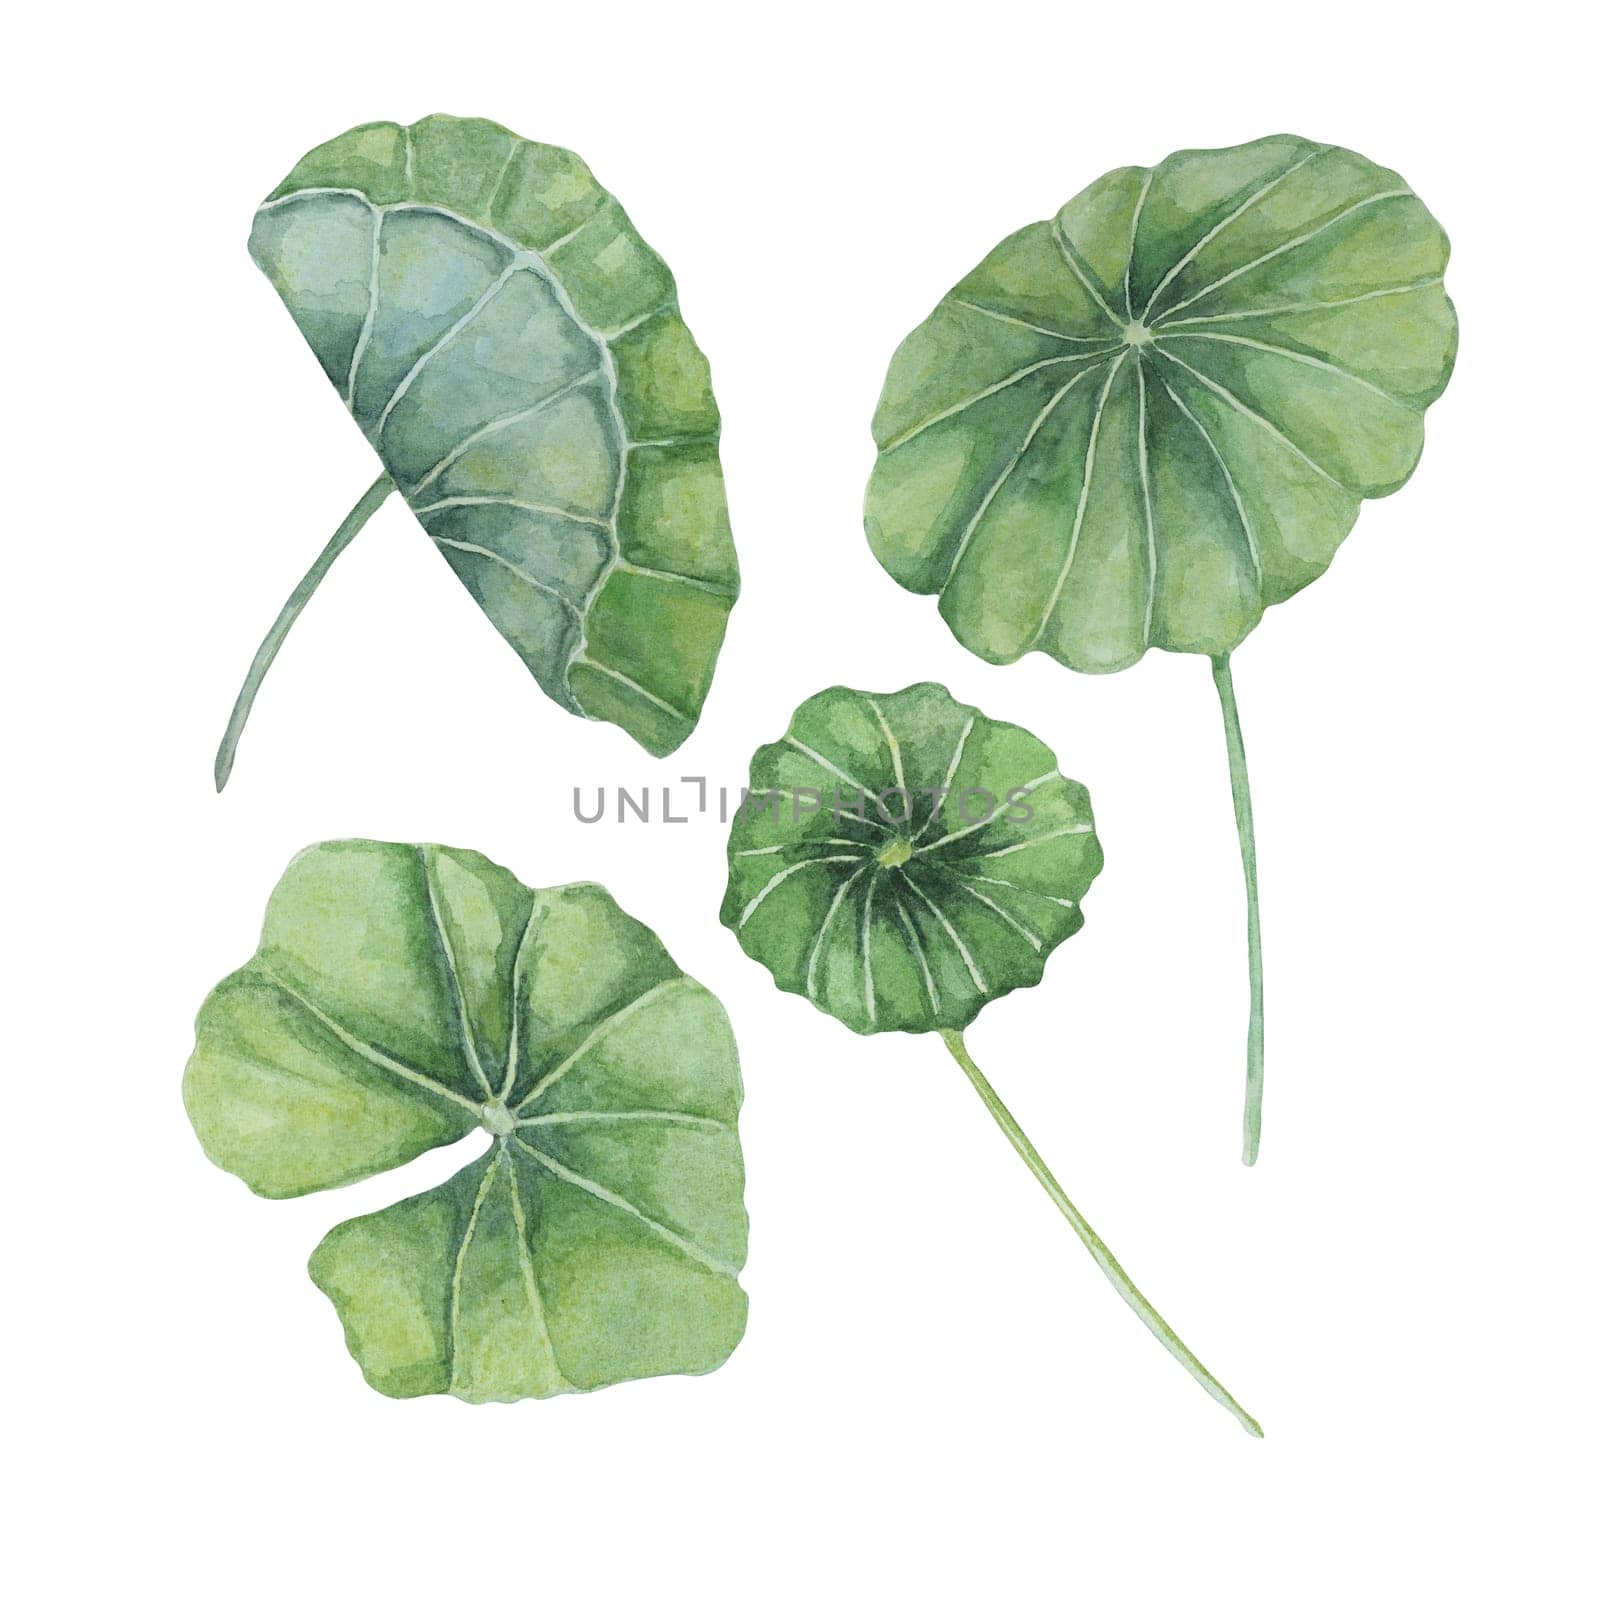 Centella asiatica, gotu cola leaves set. Hand drawn Asiatic pennywort watercolor botanical illustration, isolated elements bundle for cosmetics, packaging, beauty, labels, herbal dietary supplements